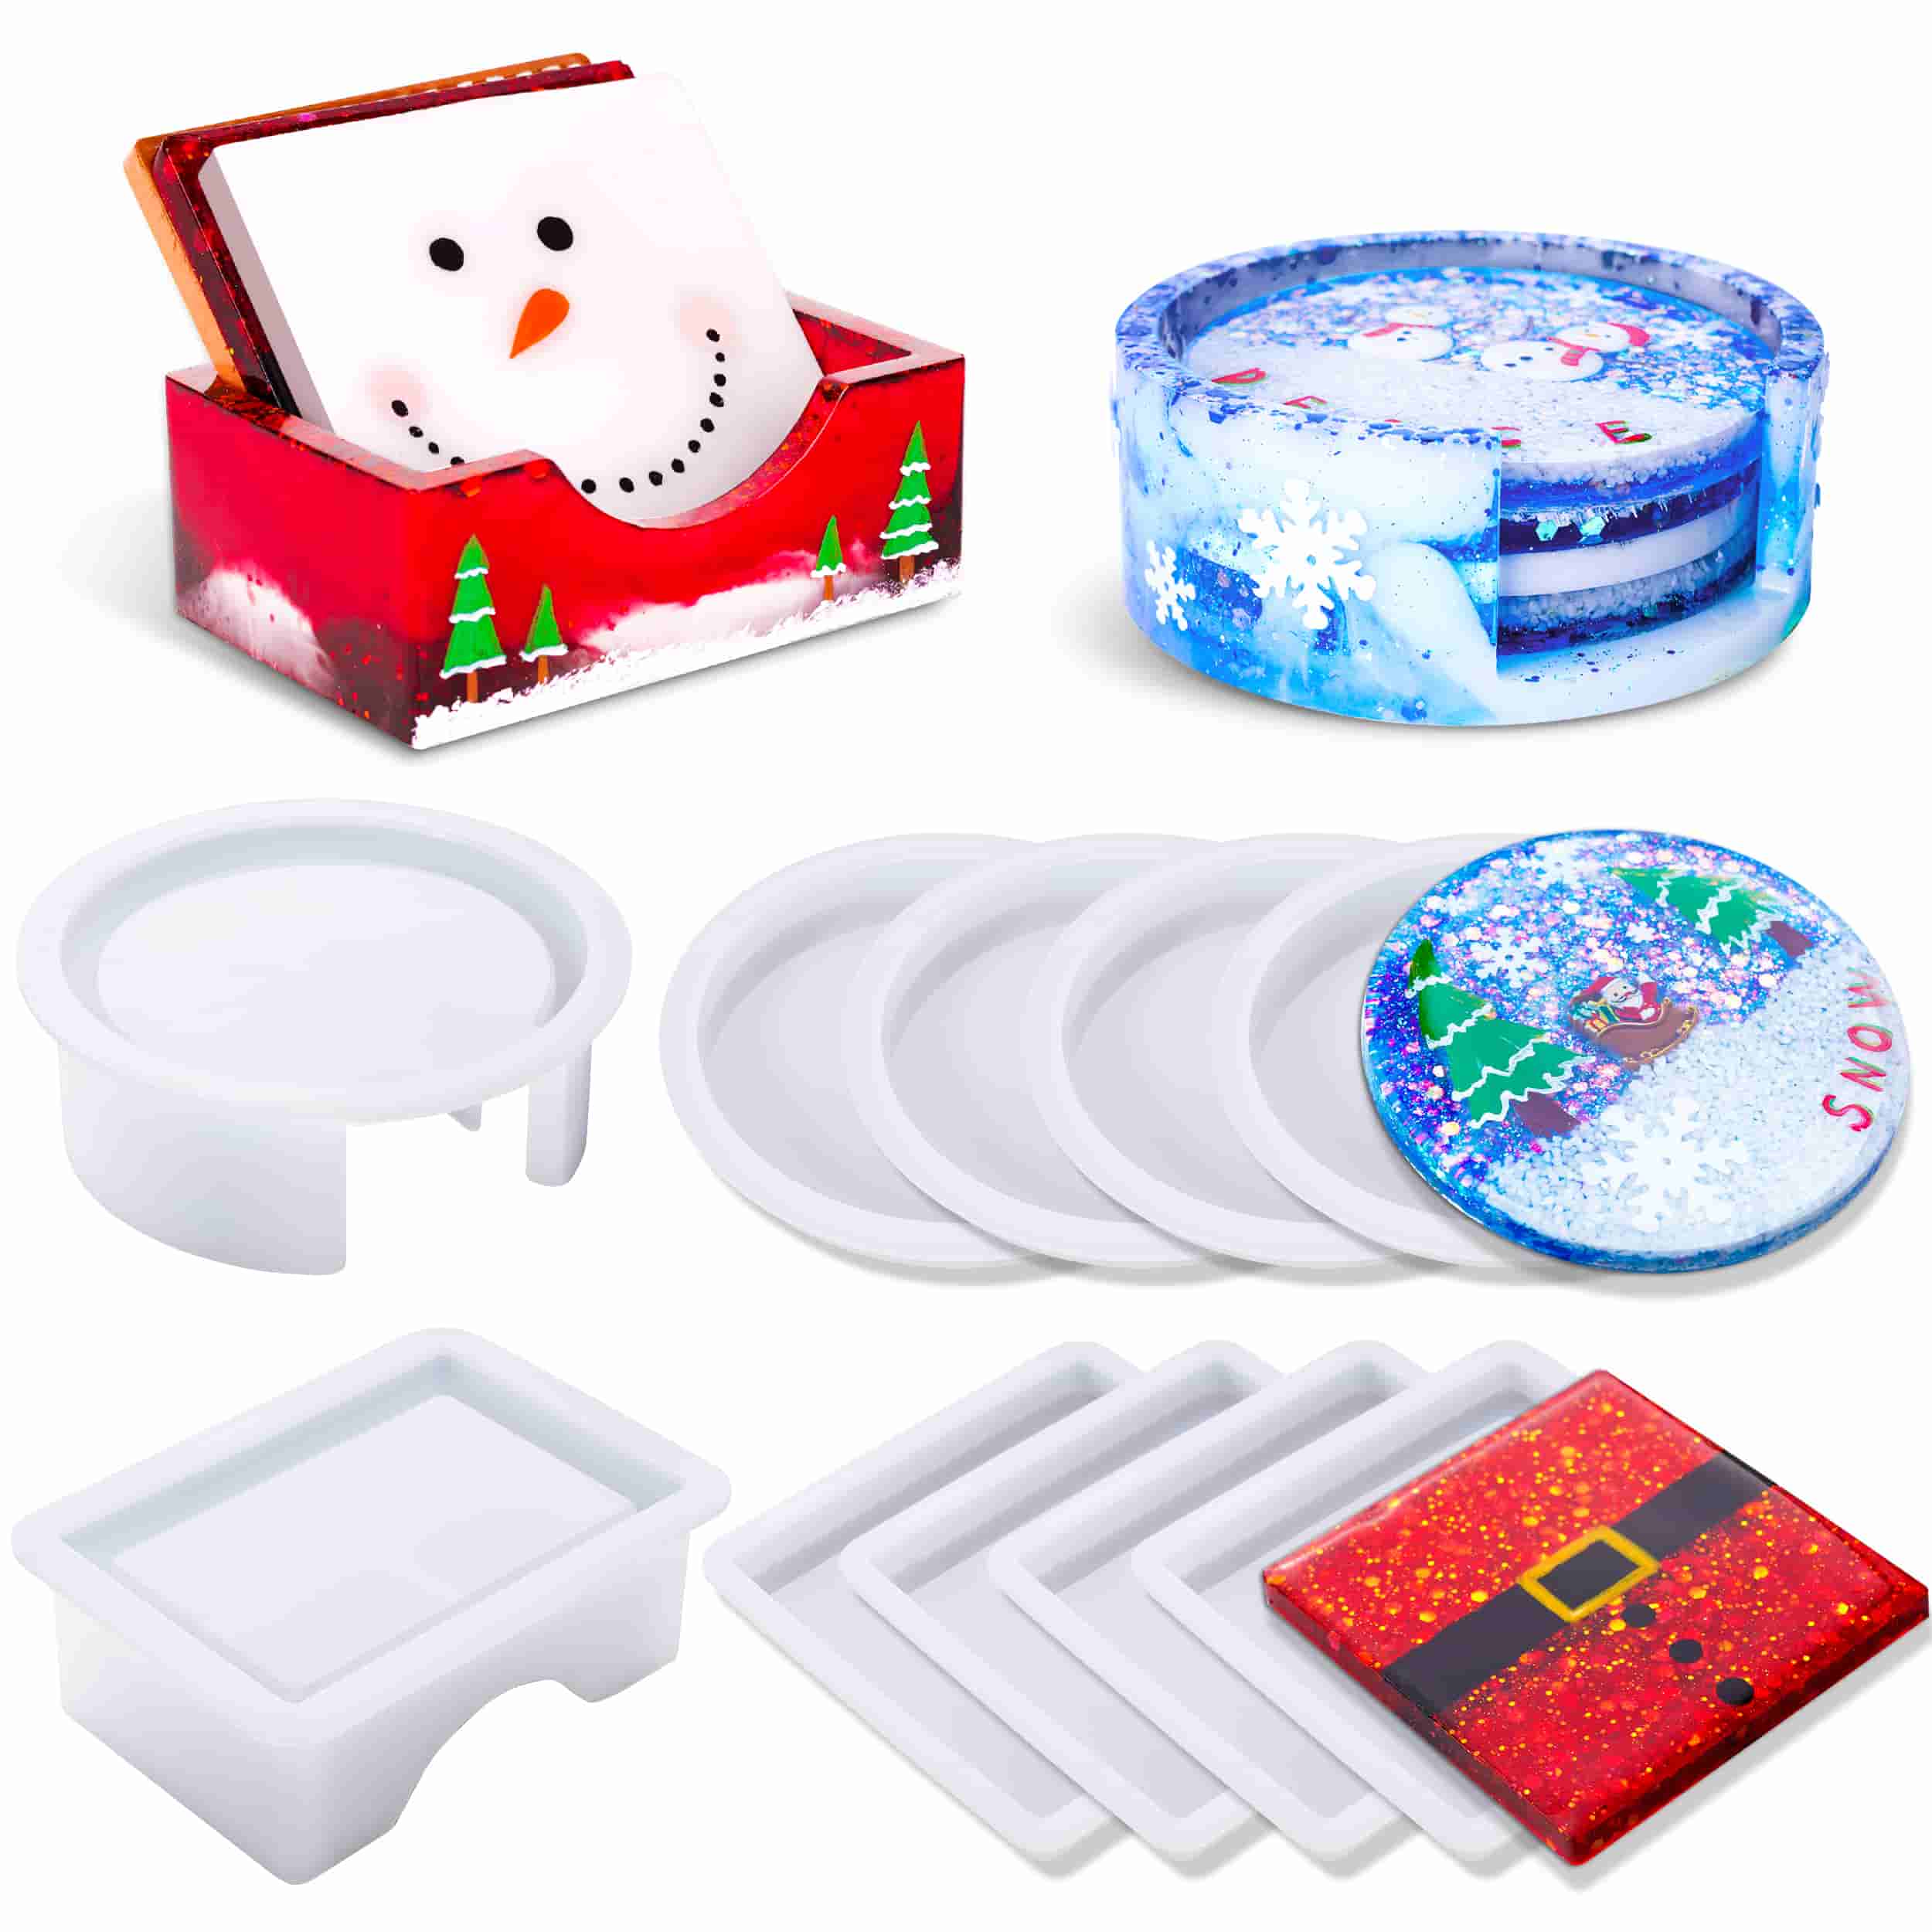 LET'S RESIN Silicone Coaster Molds, Resin Coaster Mold Kit with 10pcs  Square and Round Coaster Molds Set, Wooden Support, Coaster Holder Epoxy  Resin Molds for Resin Casting, Cups Mats, Home Decoration –